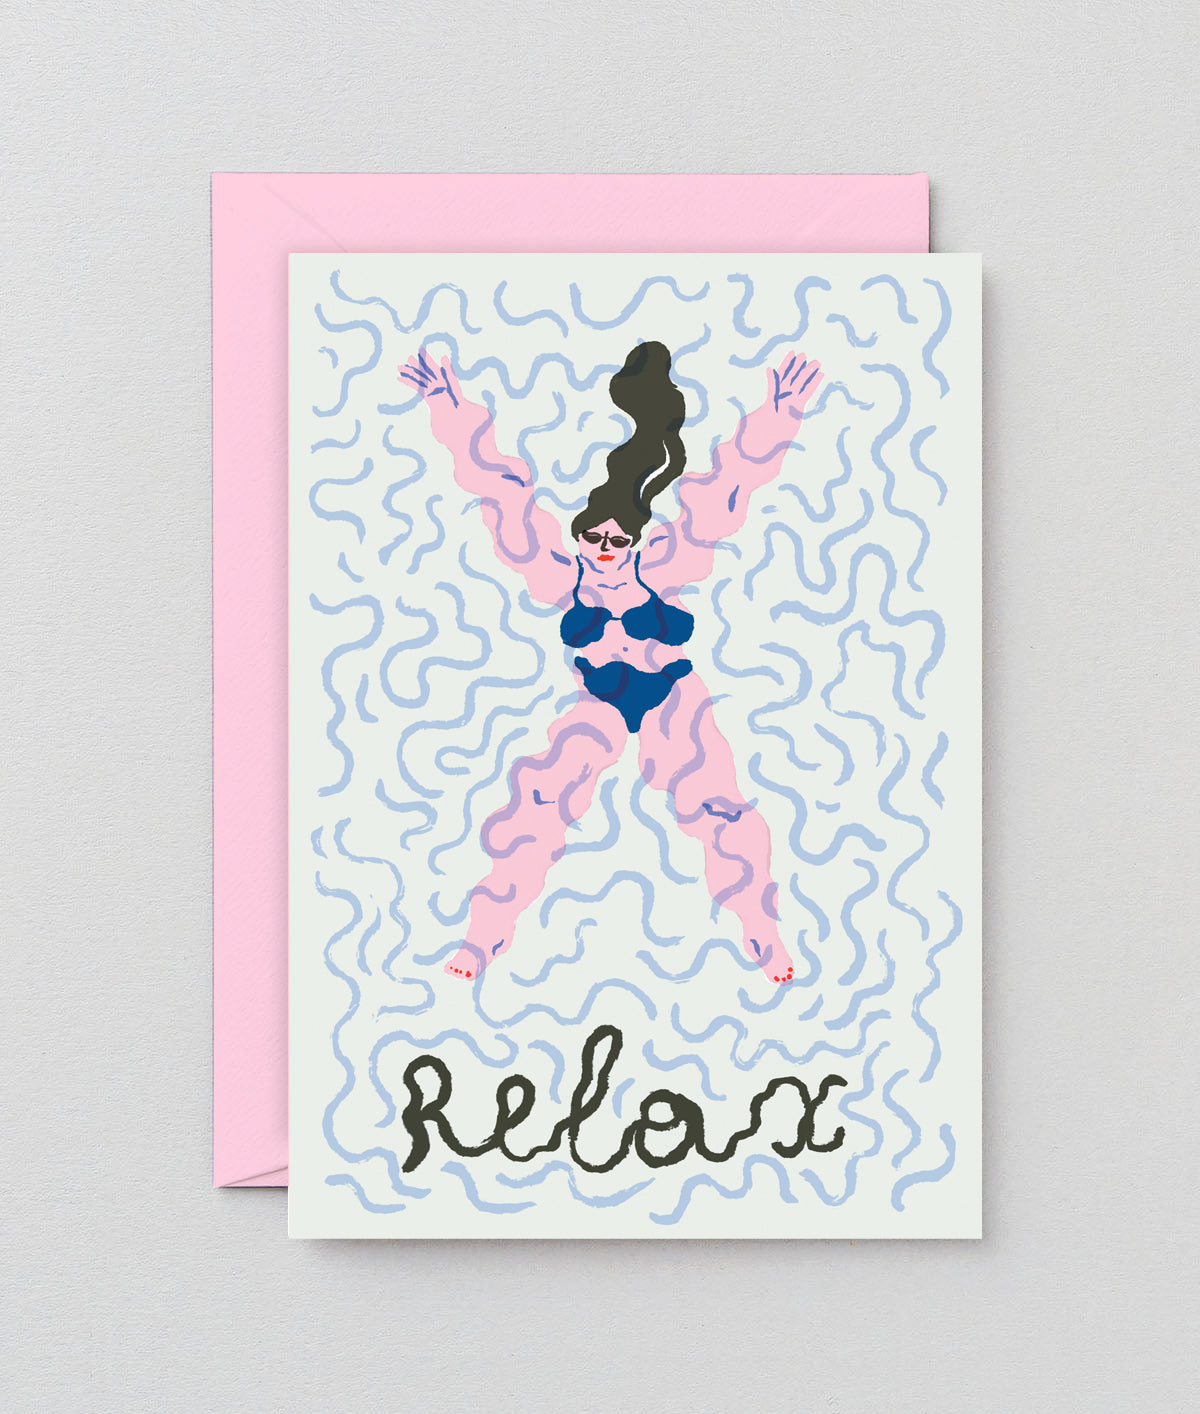 Relax Greetings Card